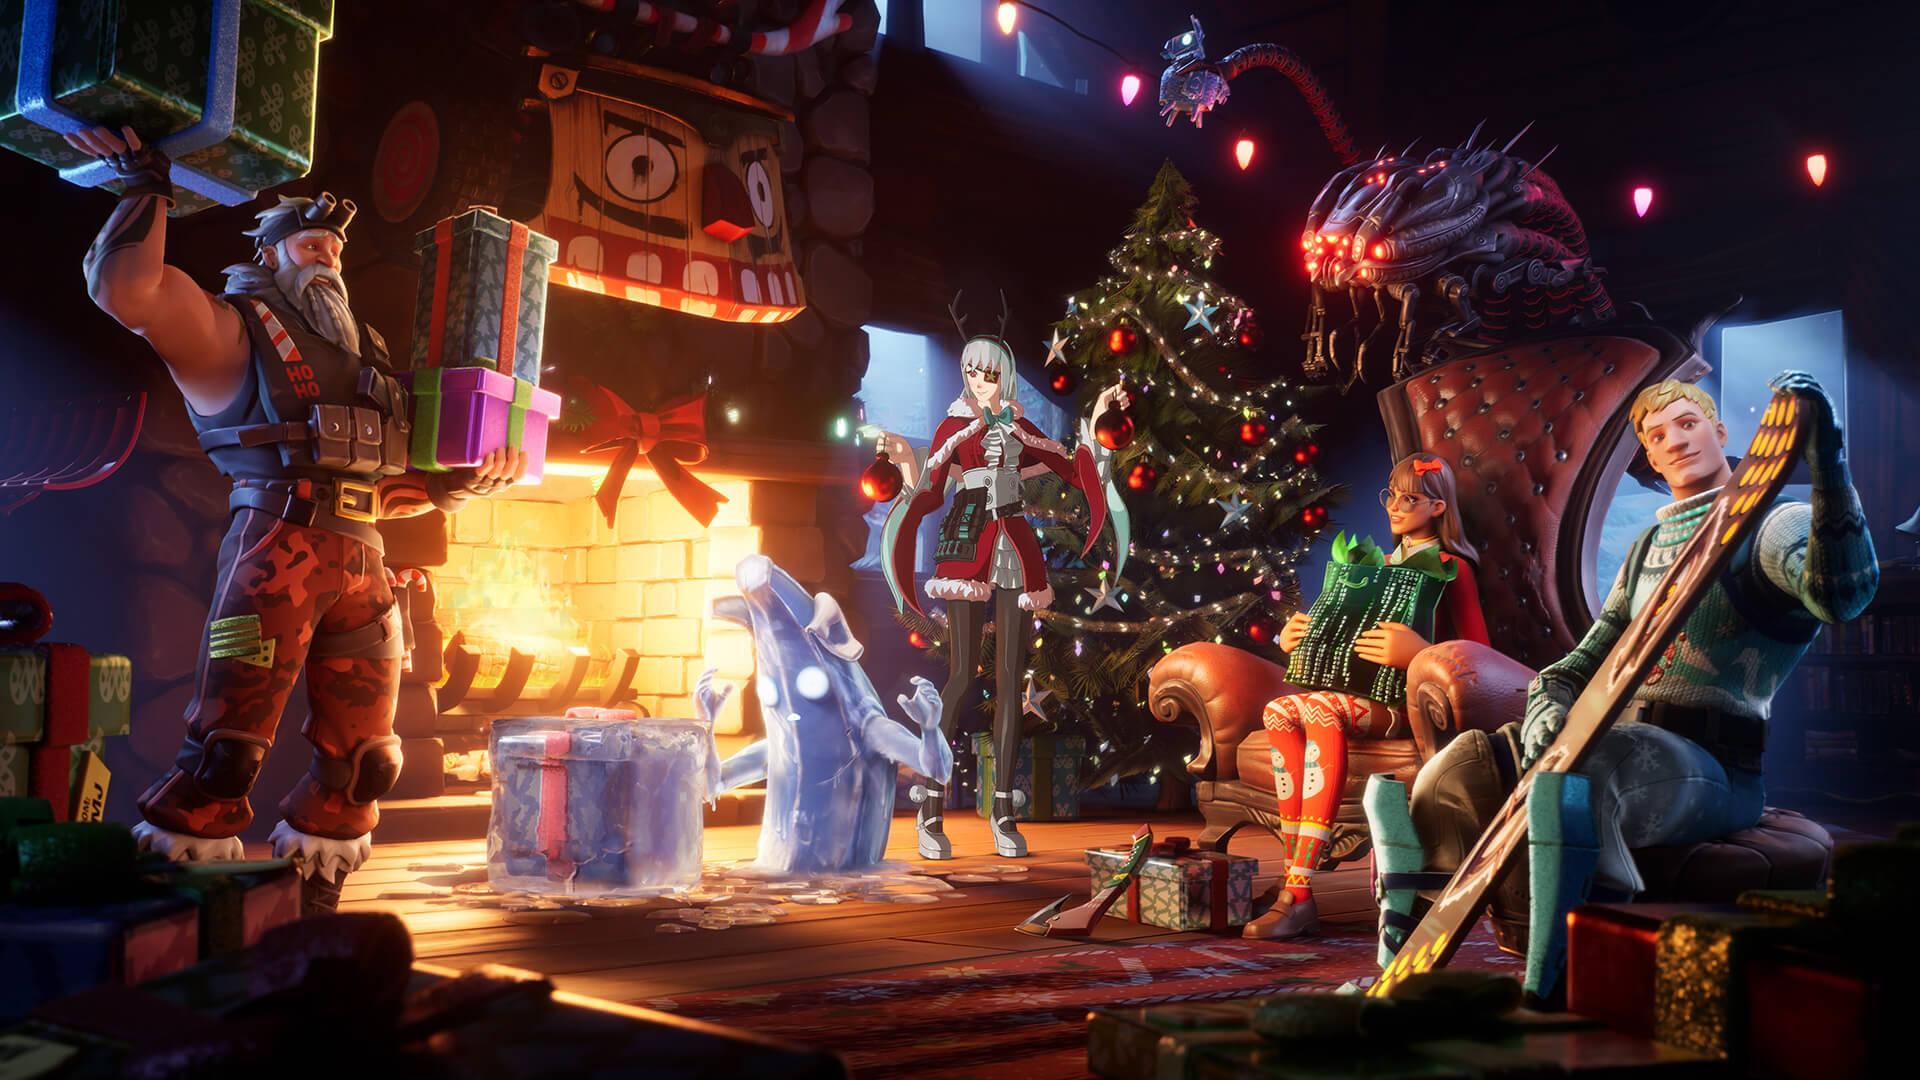 Fortnite Winterfest 2021 Brings Presents, Special Quests, Spider Man: No Way Home Outfits, And More!